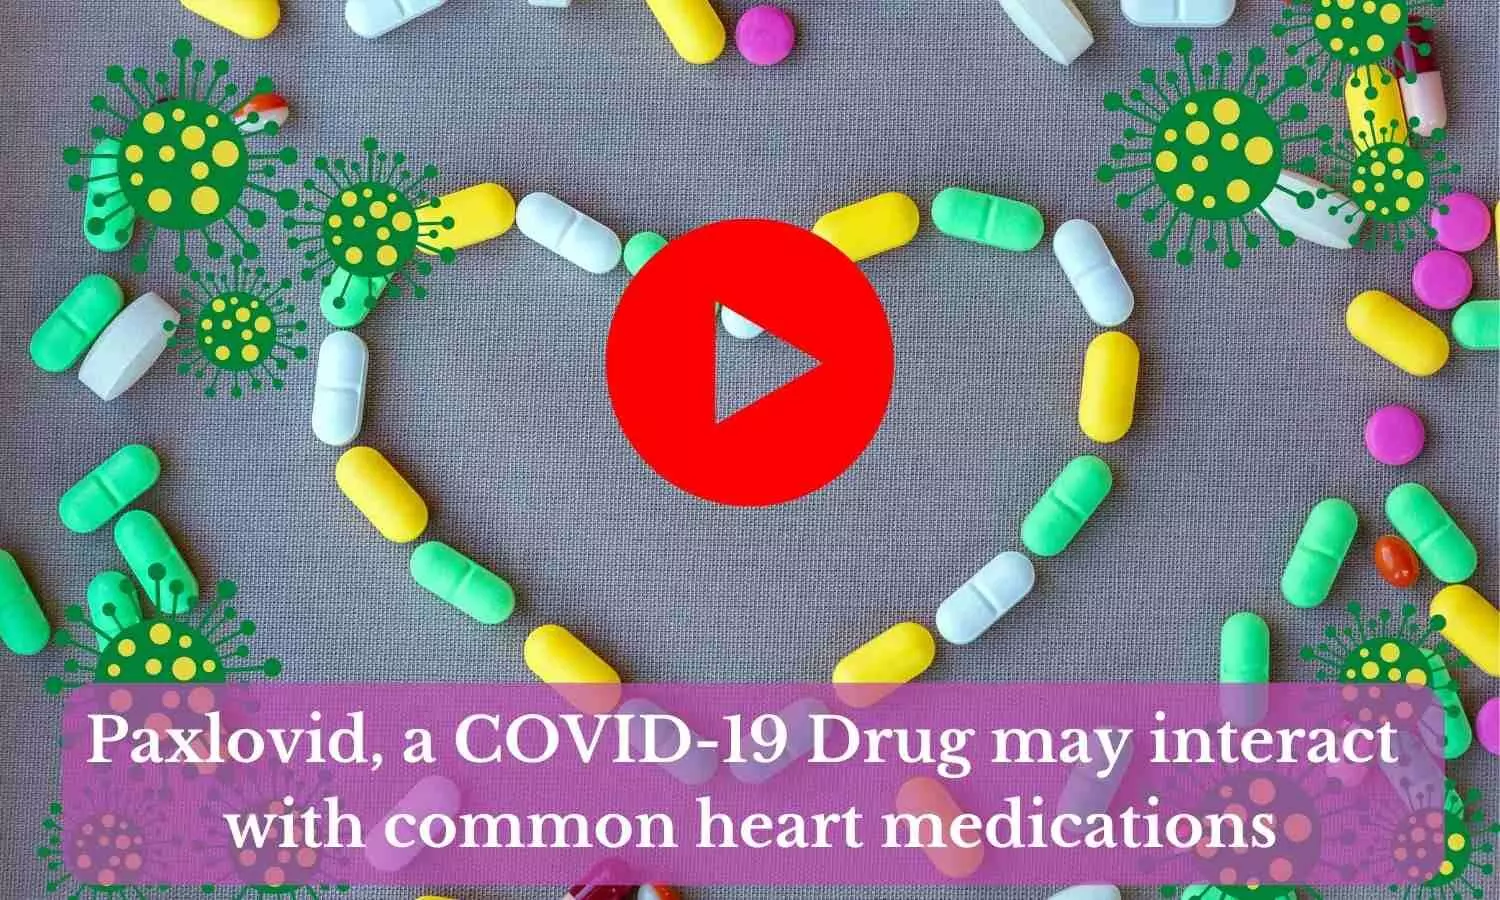 JACC review pinpoints drug interactions of COVID drug Paxlovid with common heart medications